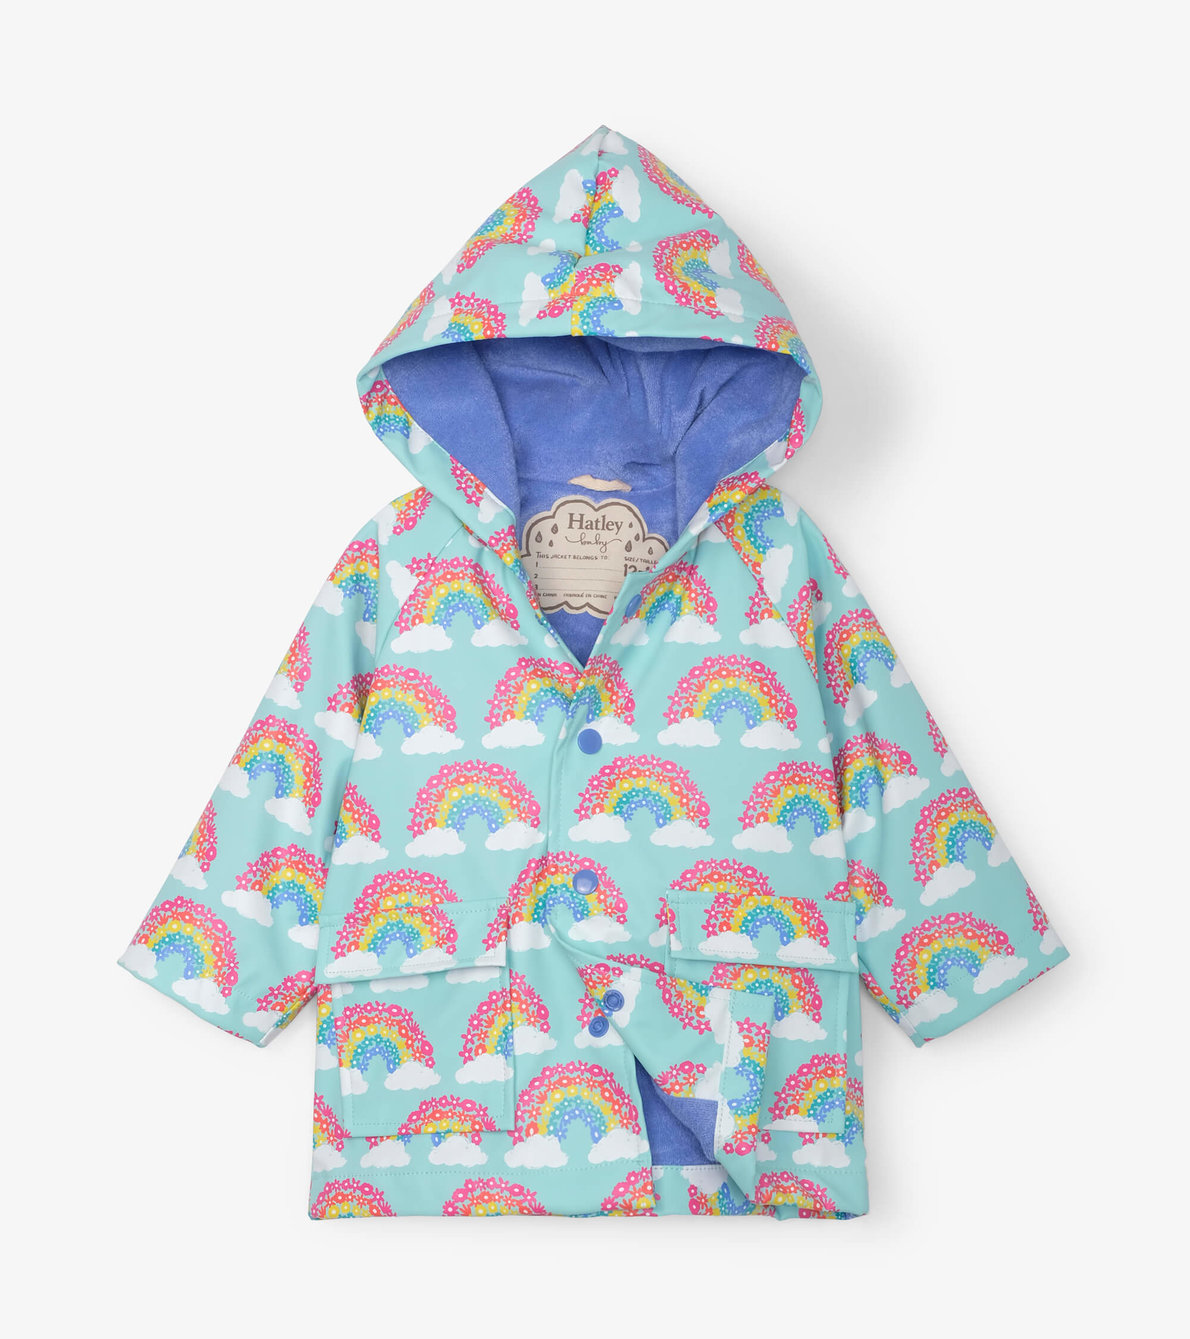 View larger image of Magical Rainbows Baby Raincoat